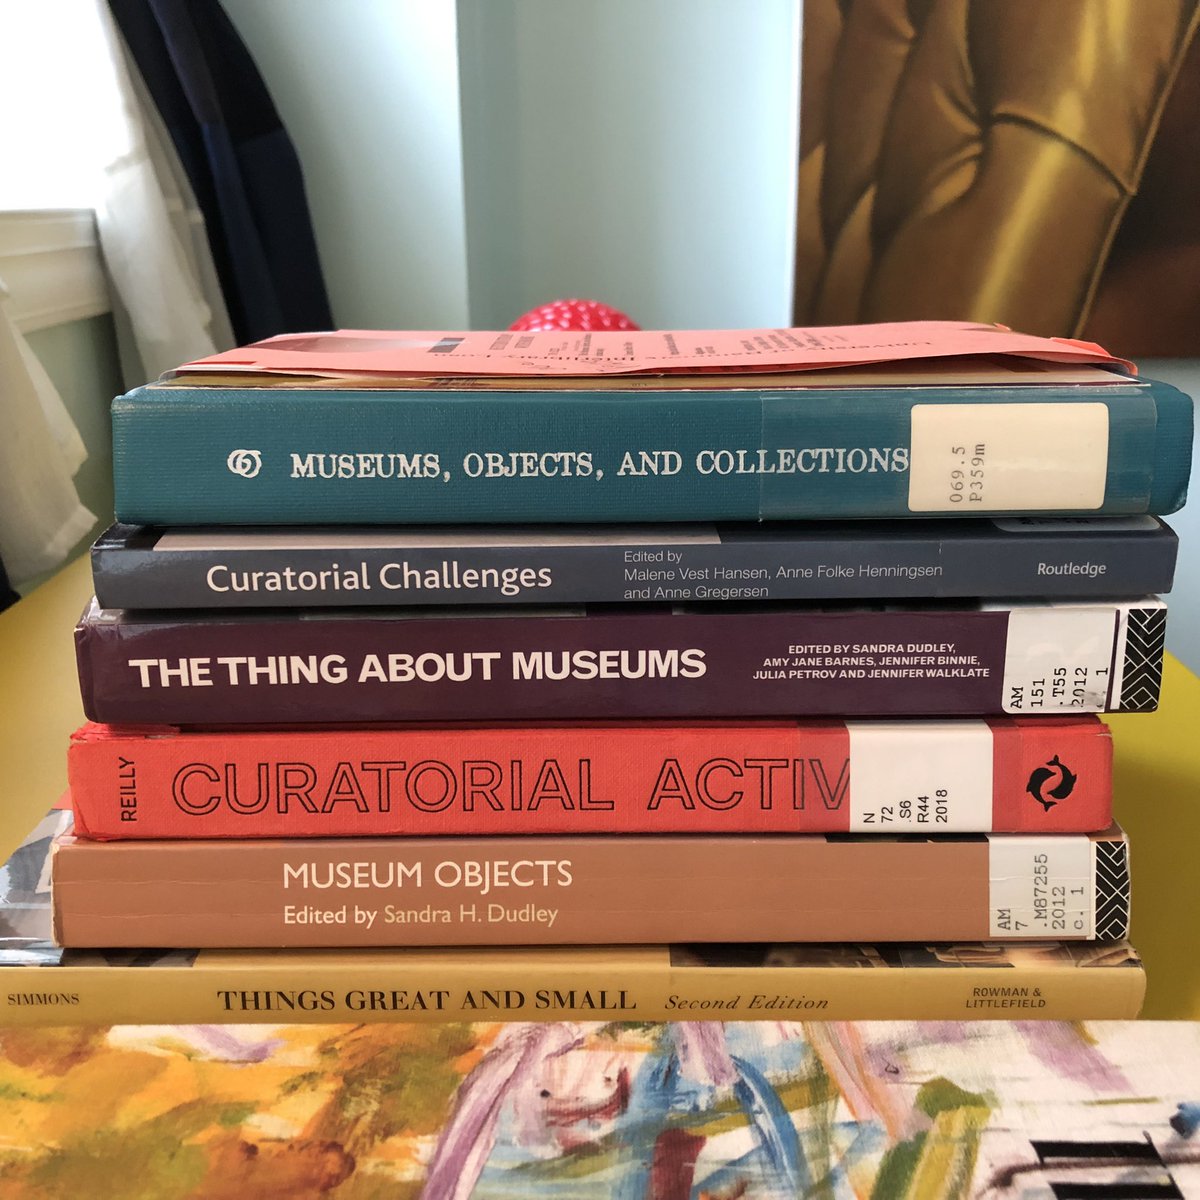 Neither the local library nor my university one had these books…feeling very grateful for interlibrary loan! 😆📚#WIP #MuseumStudies #CuratorialStudies